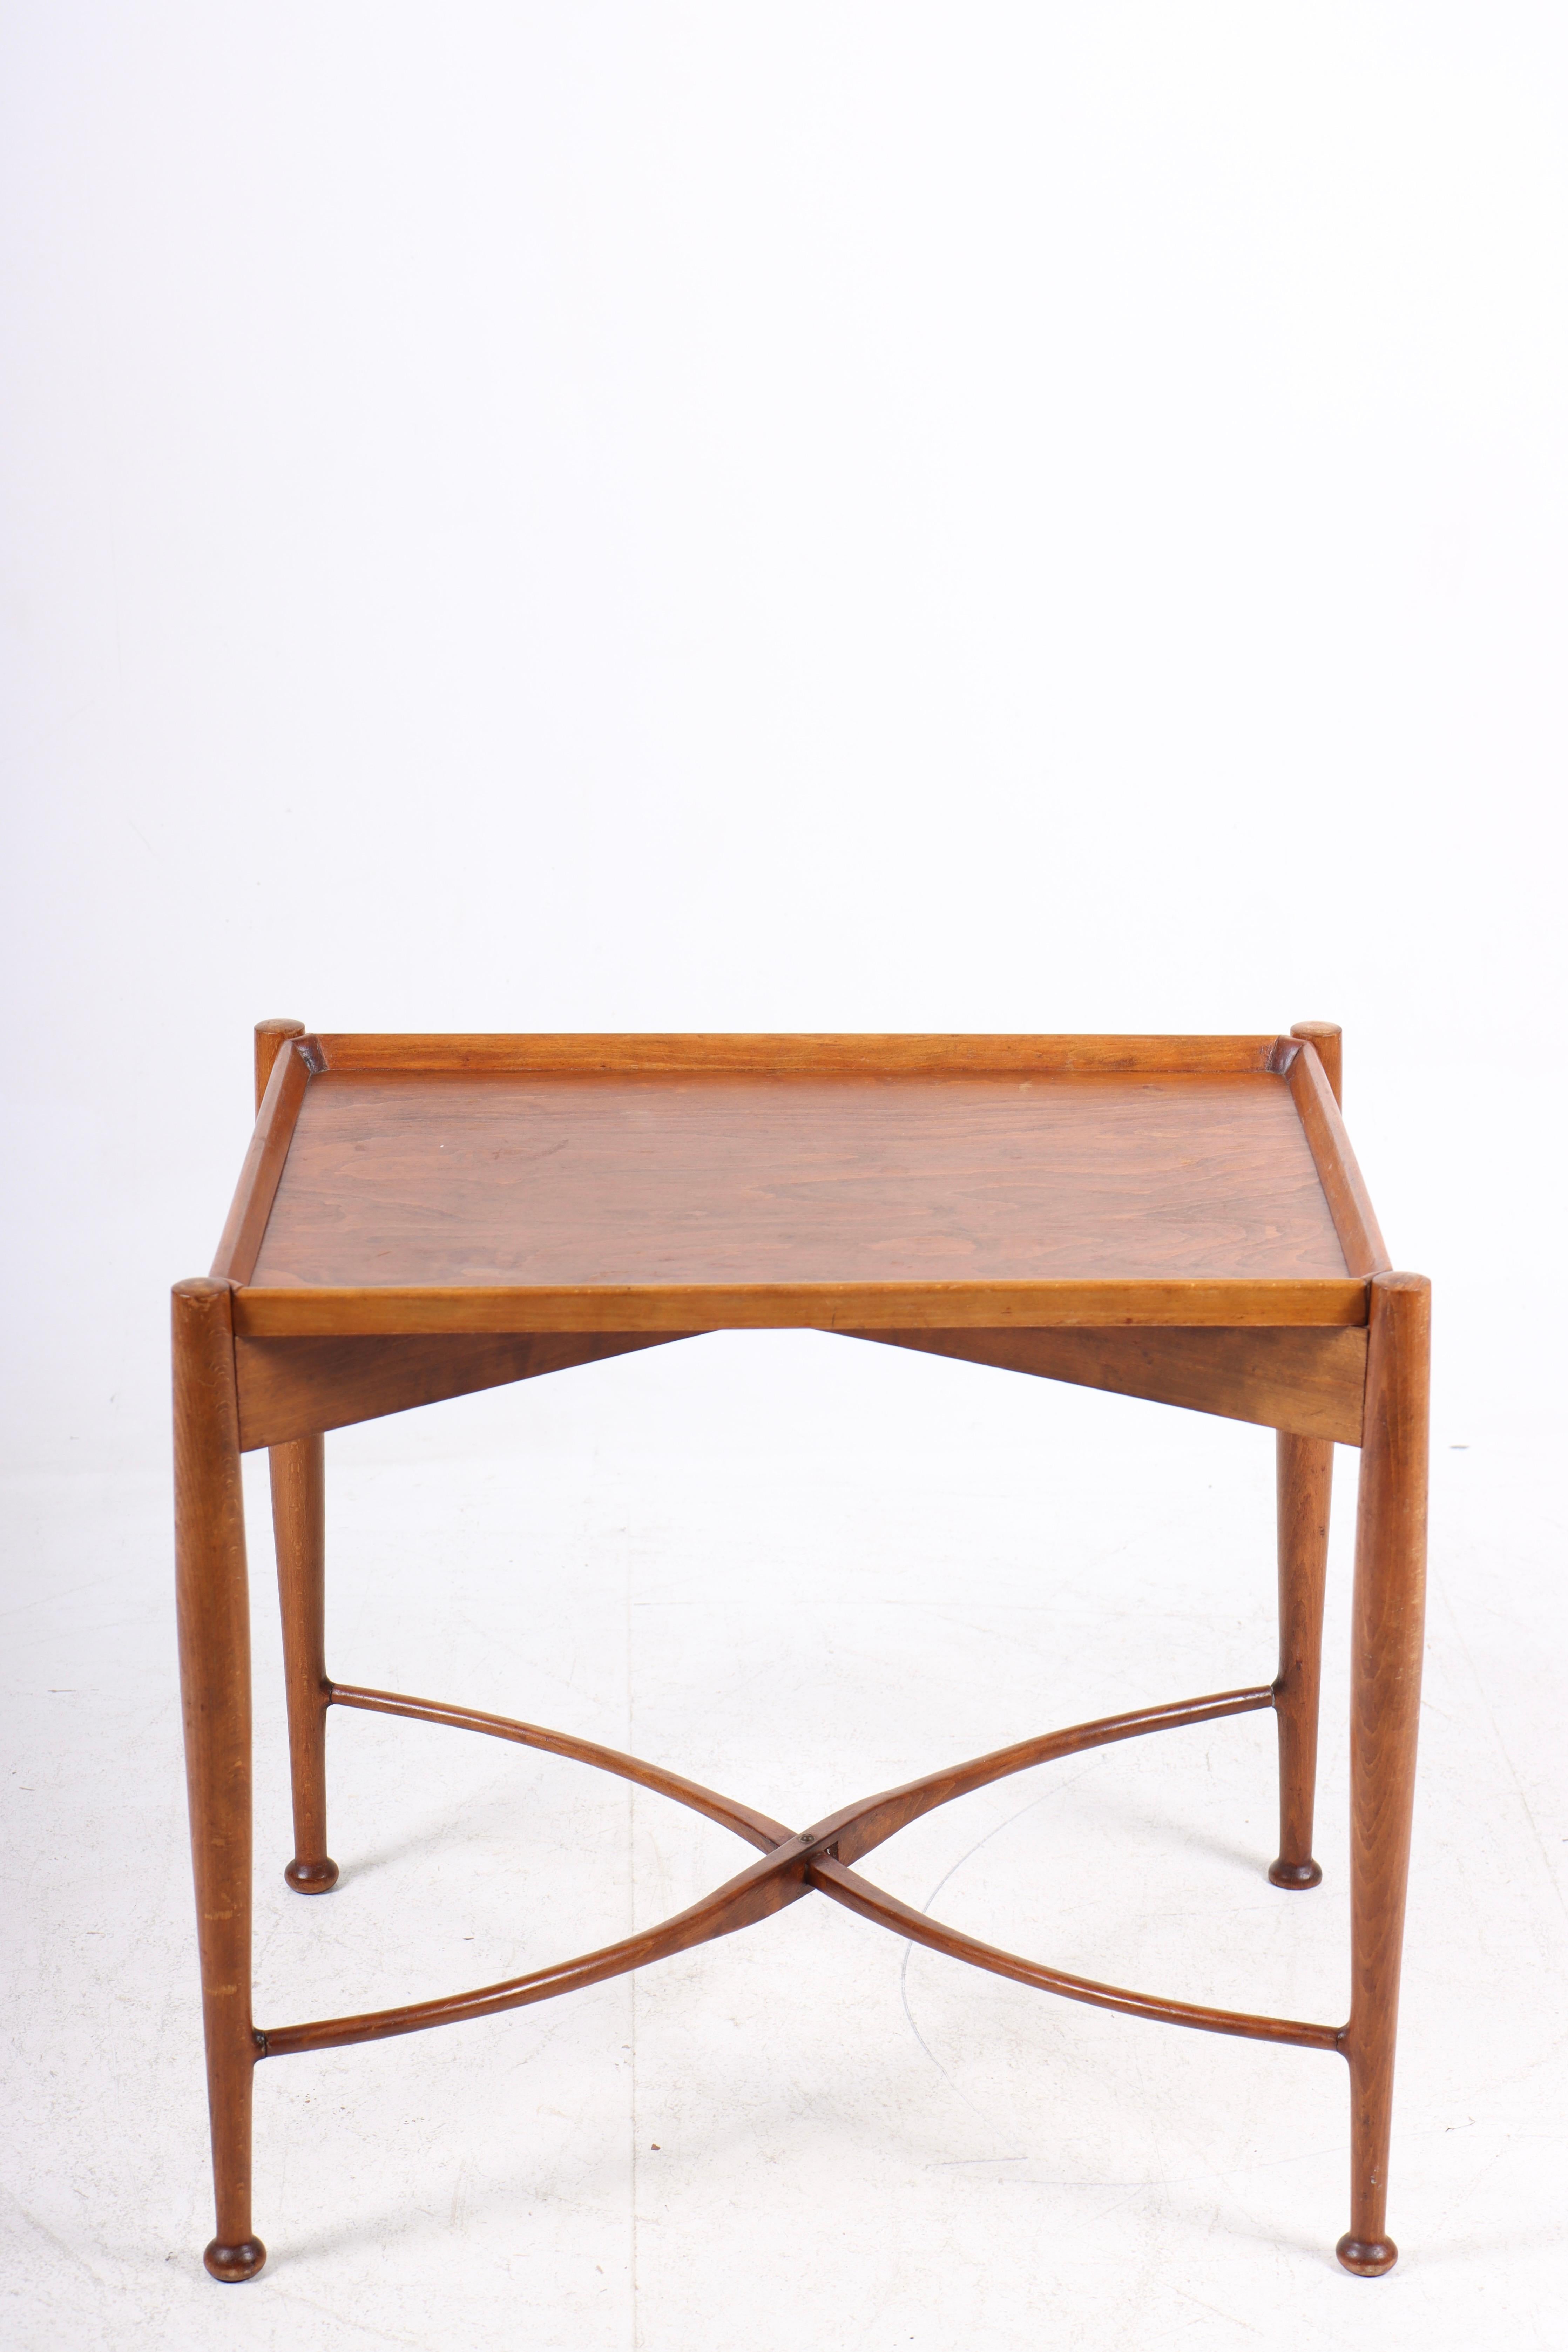 Tray table in beech. Designed and made in Denmark in the 1950s. Great original condition.